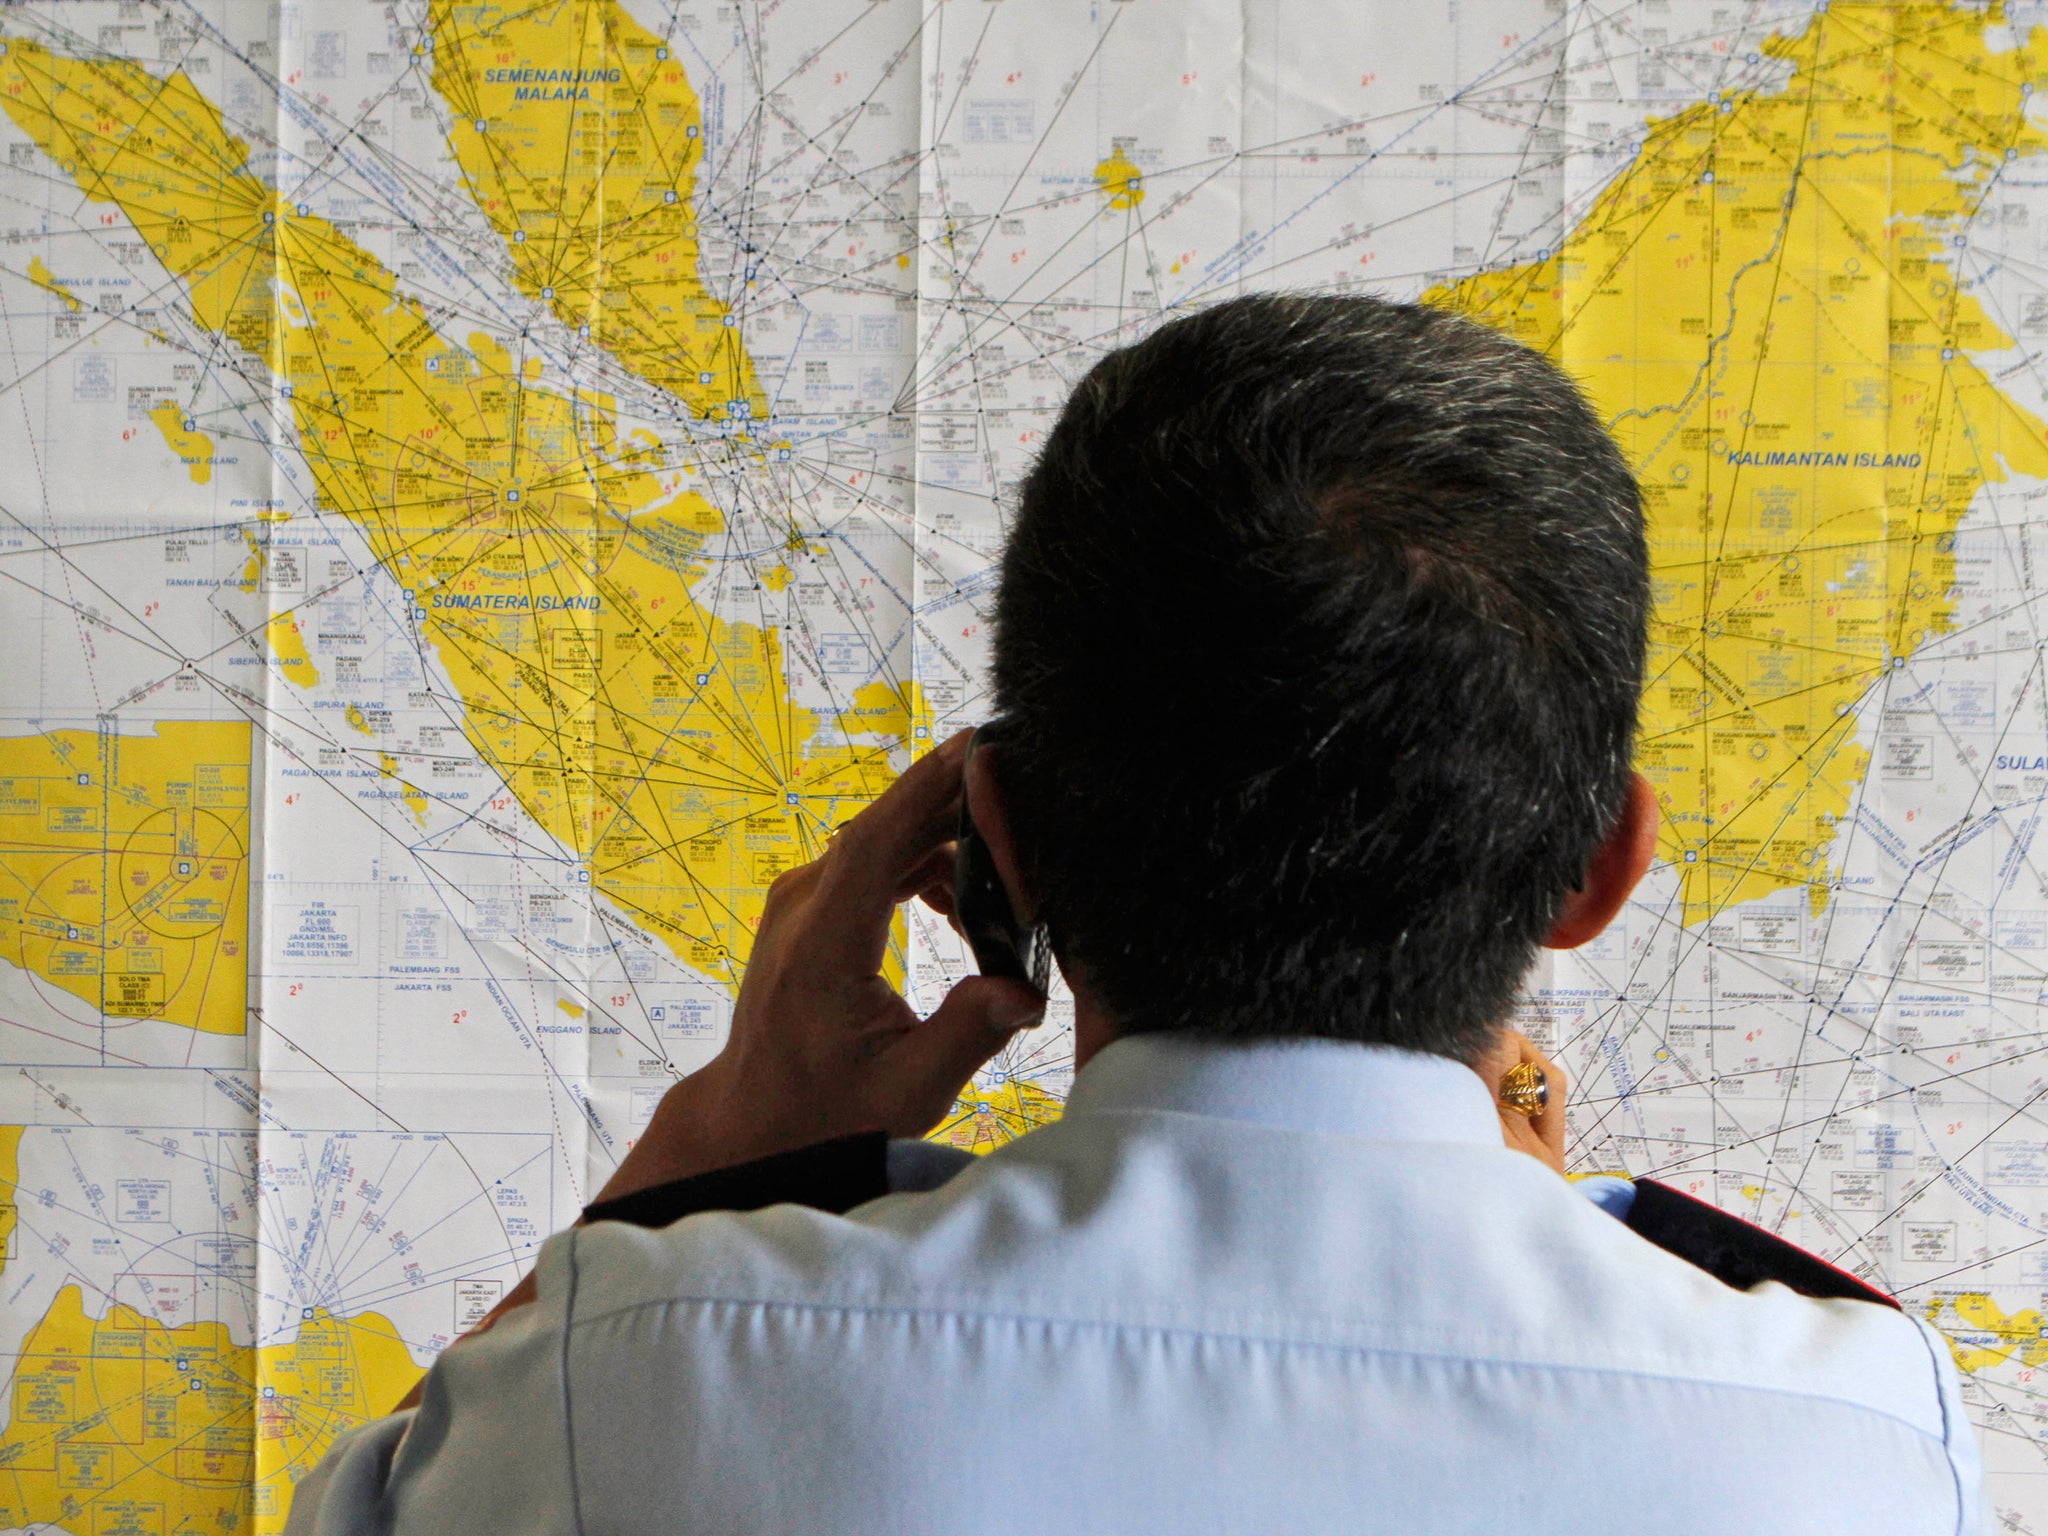 An airport official checks a map at the crisis centre set up by local authorities in the wake of AirAsia flight QZ8501 having gone missing